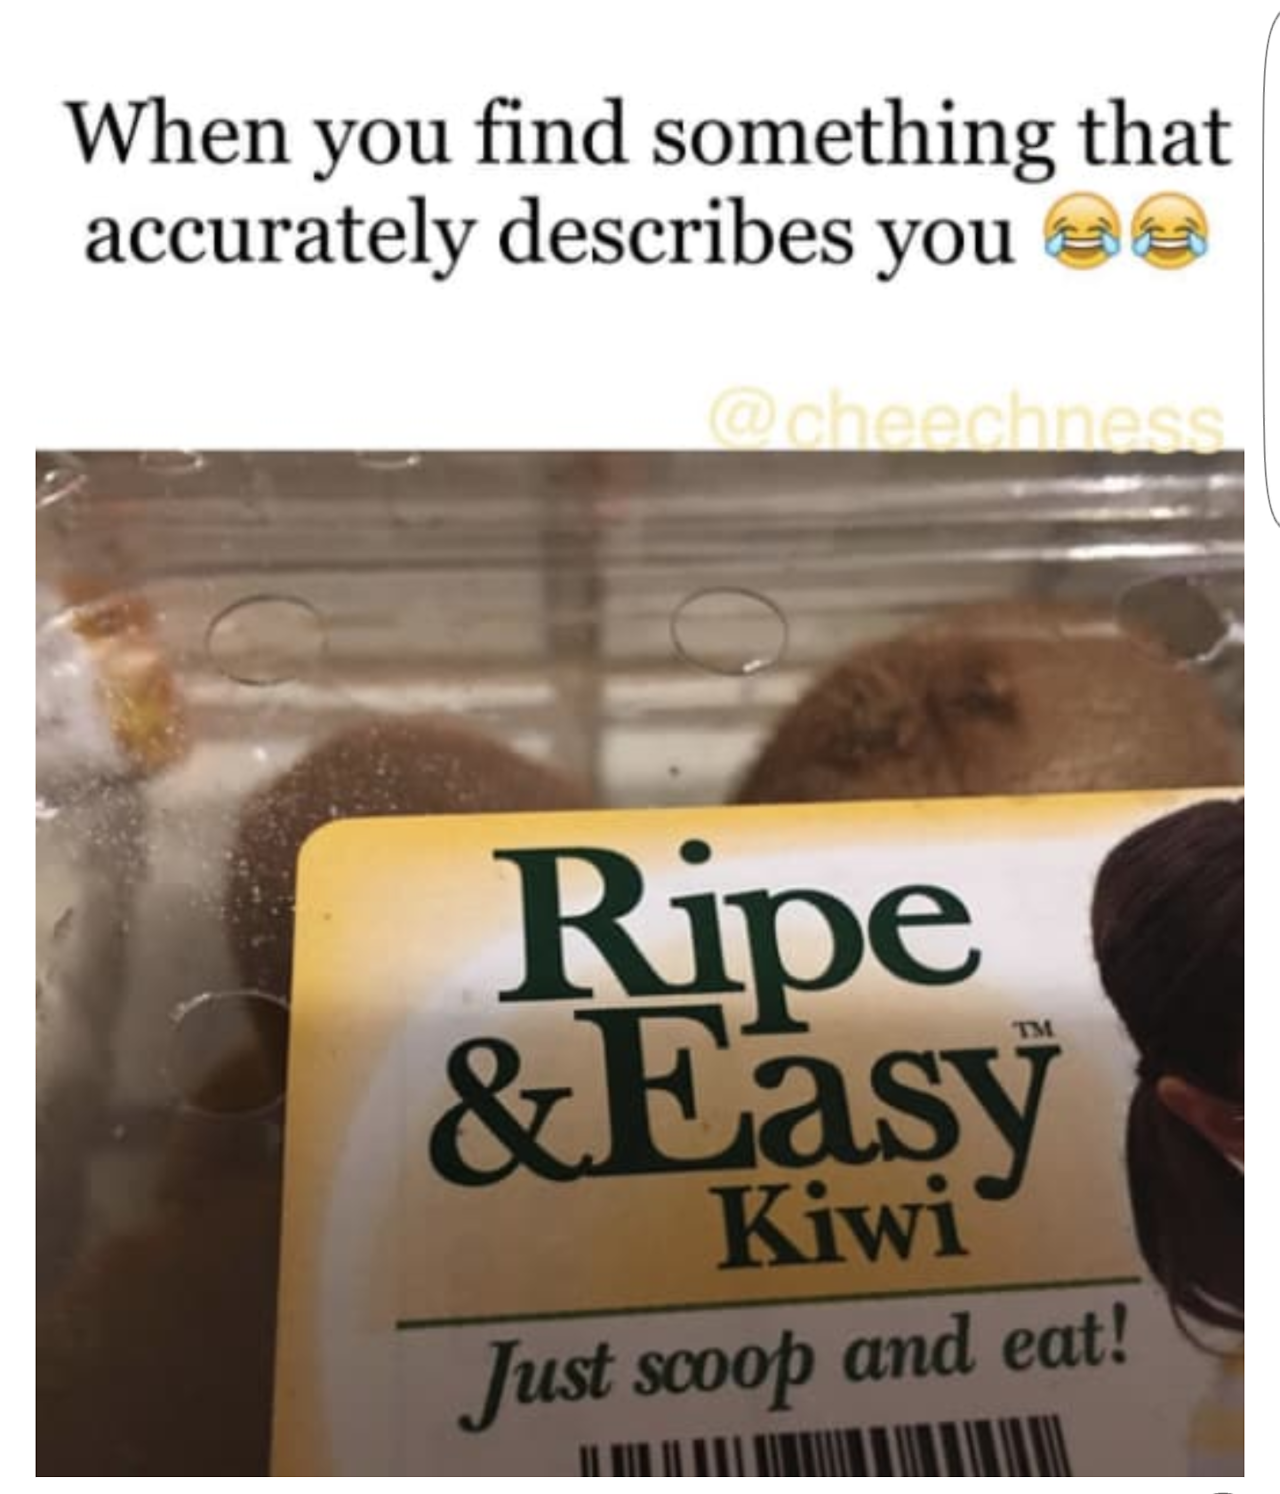 memes - When you find something that accurately describes you Be Ripe &Easy Kiwi Just scoop and eat!